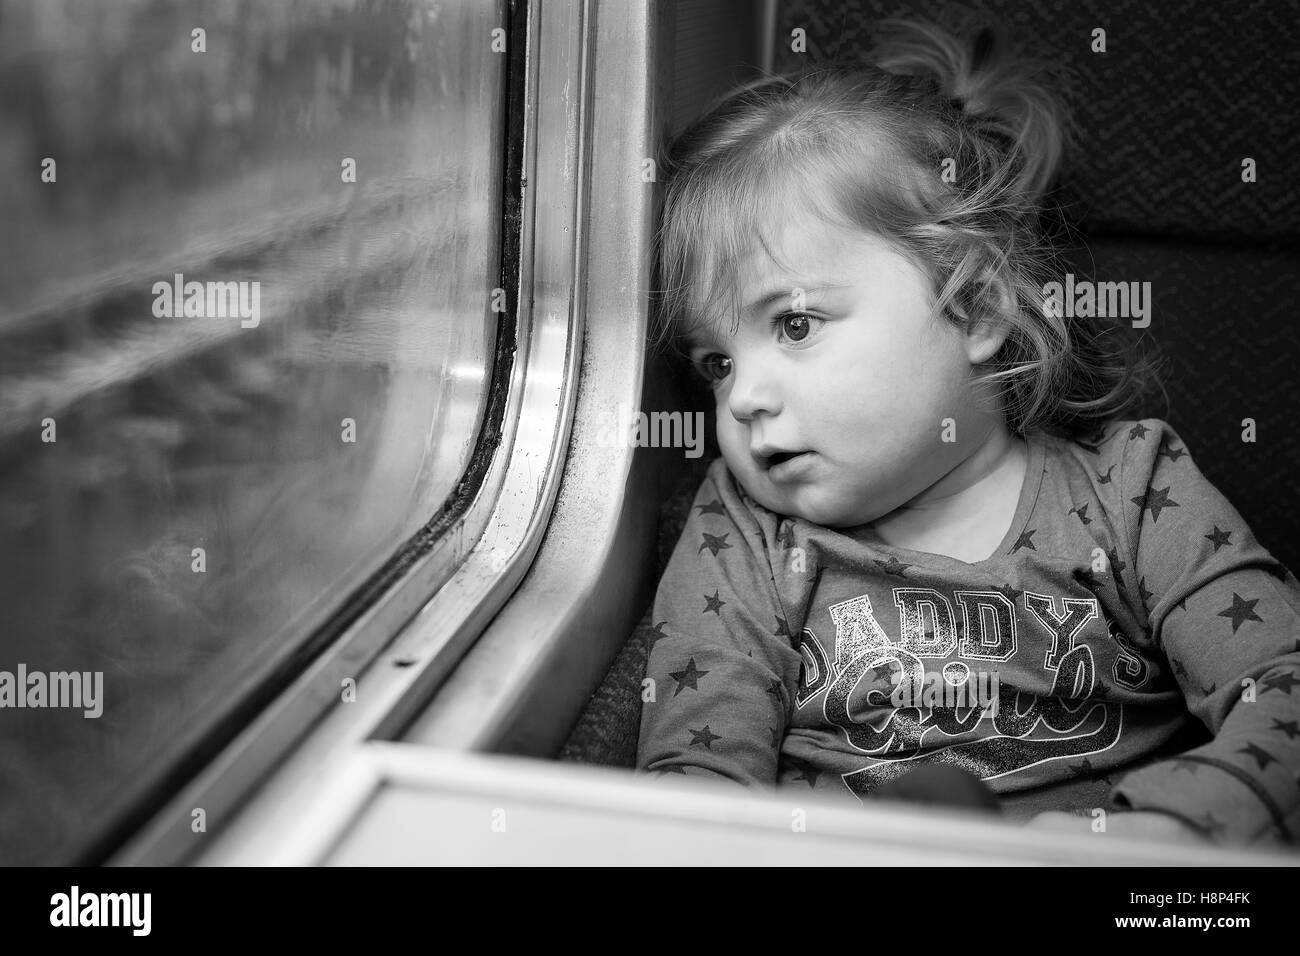 Cute innocent little girl traveling by train in England Stock Photo